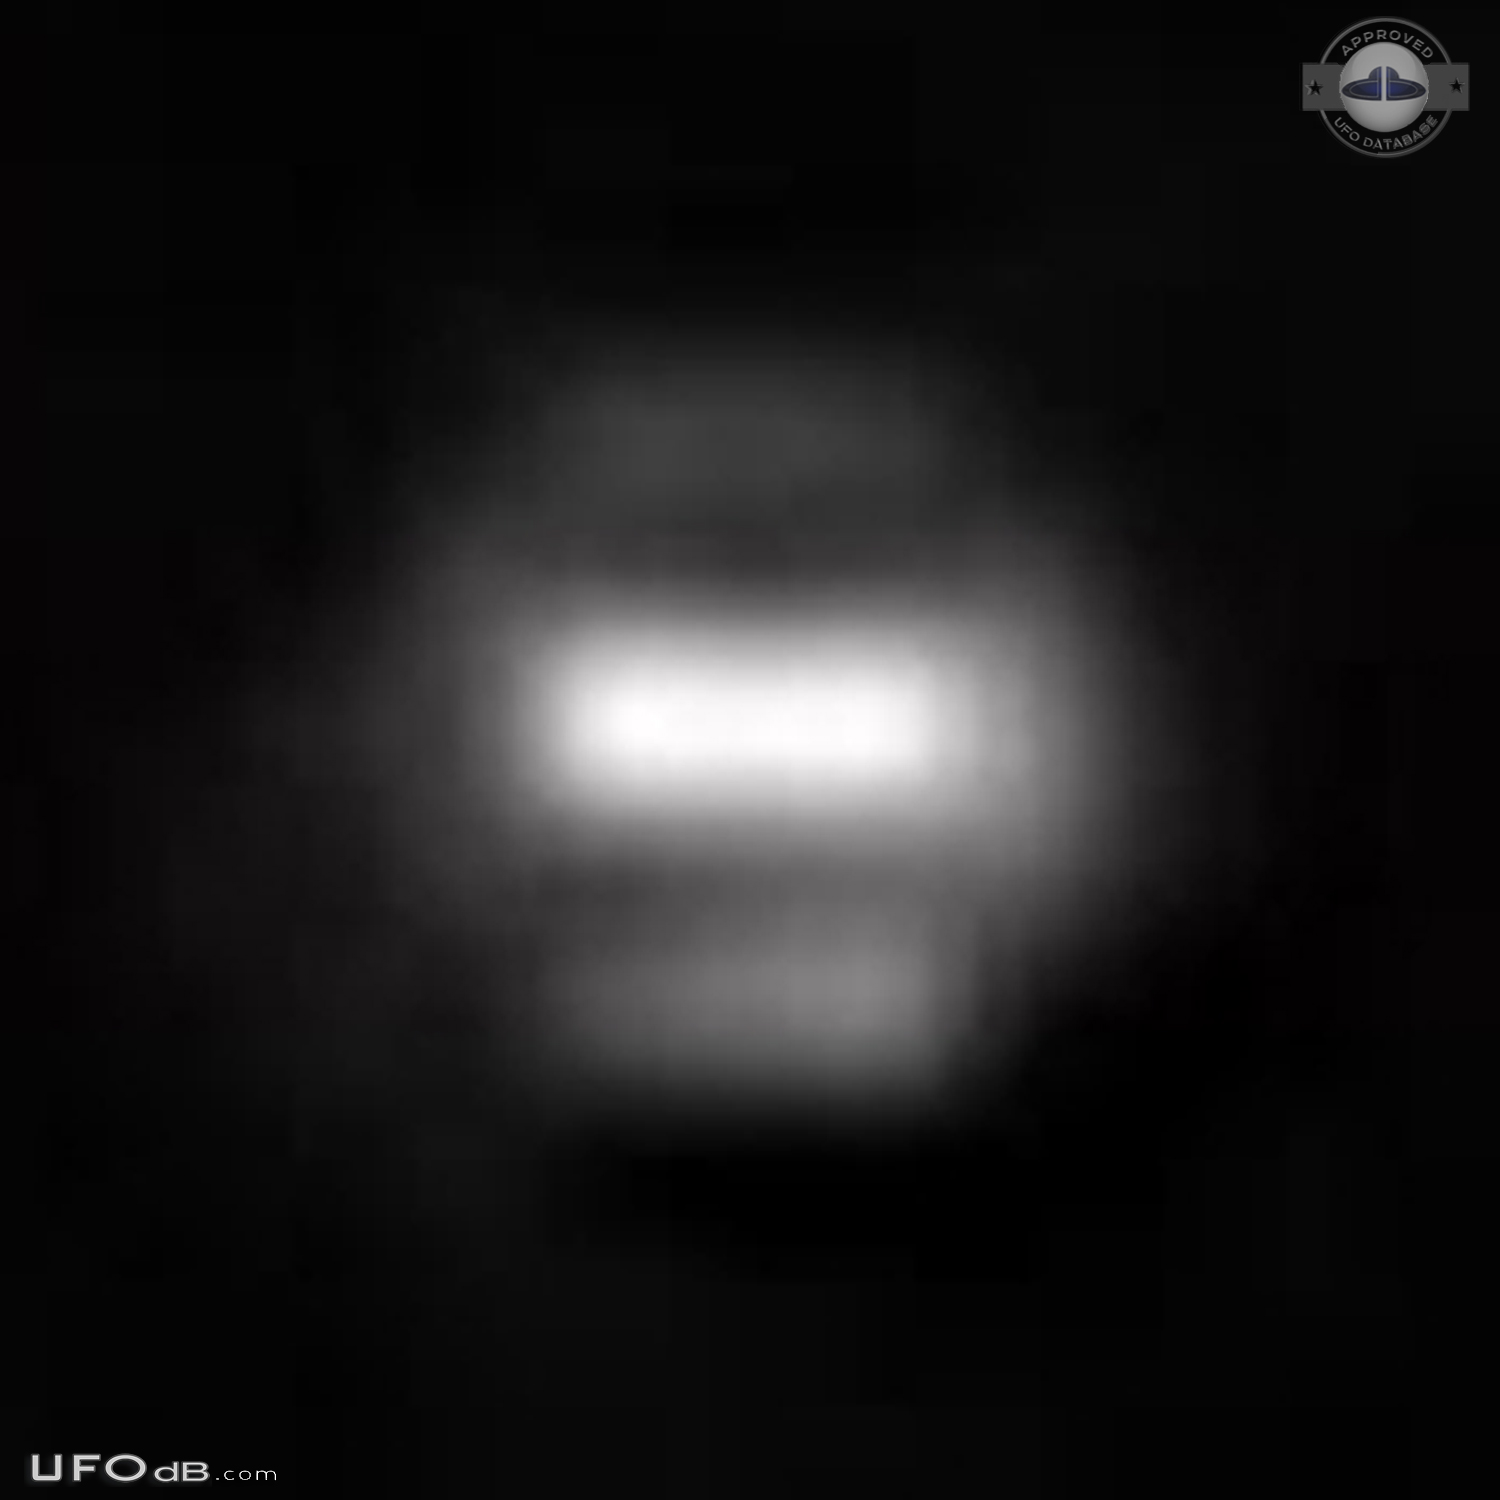 Airplane Passenger UFO sighting from Phoenix Bound Plan March 2015 UFO Picture #661-4